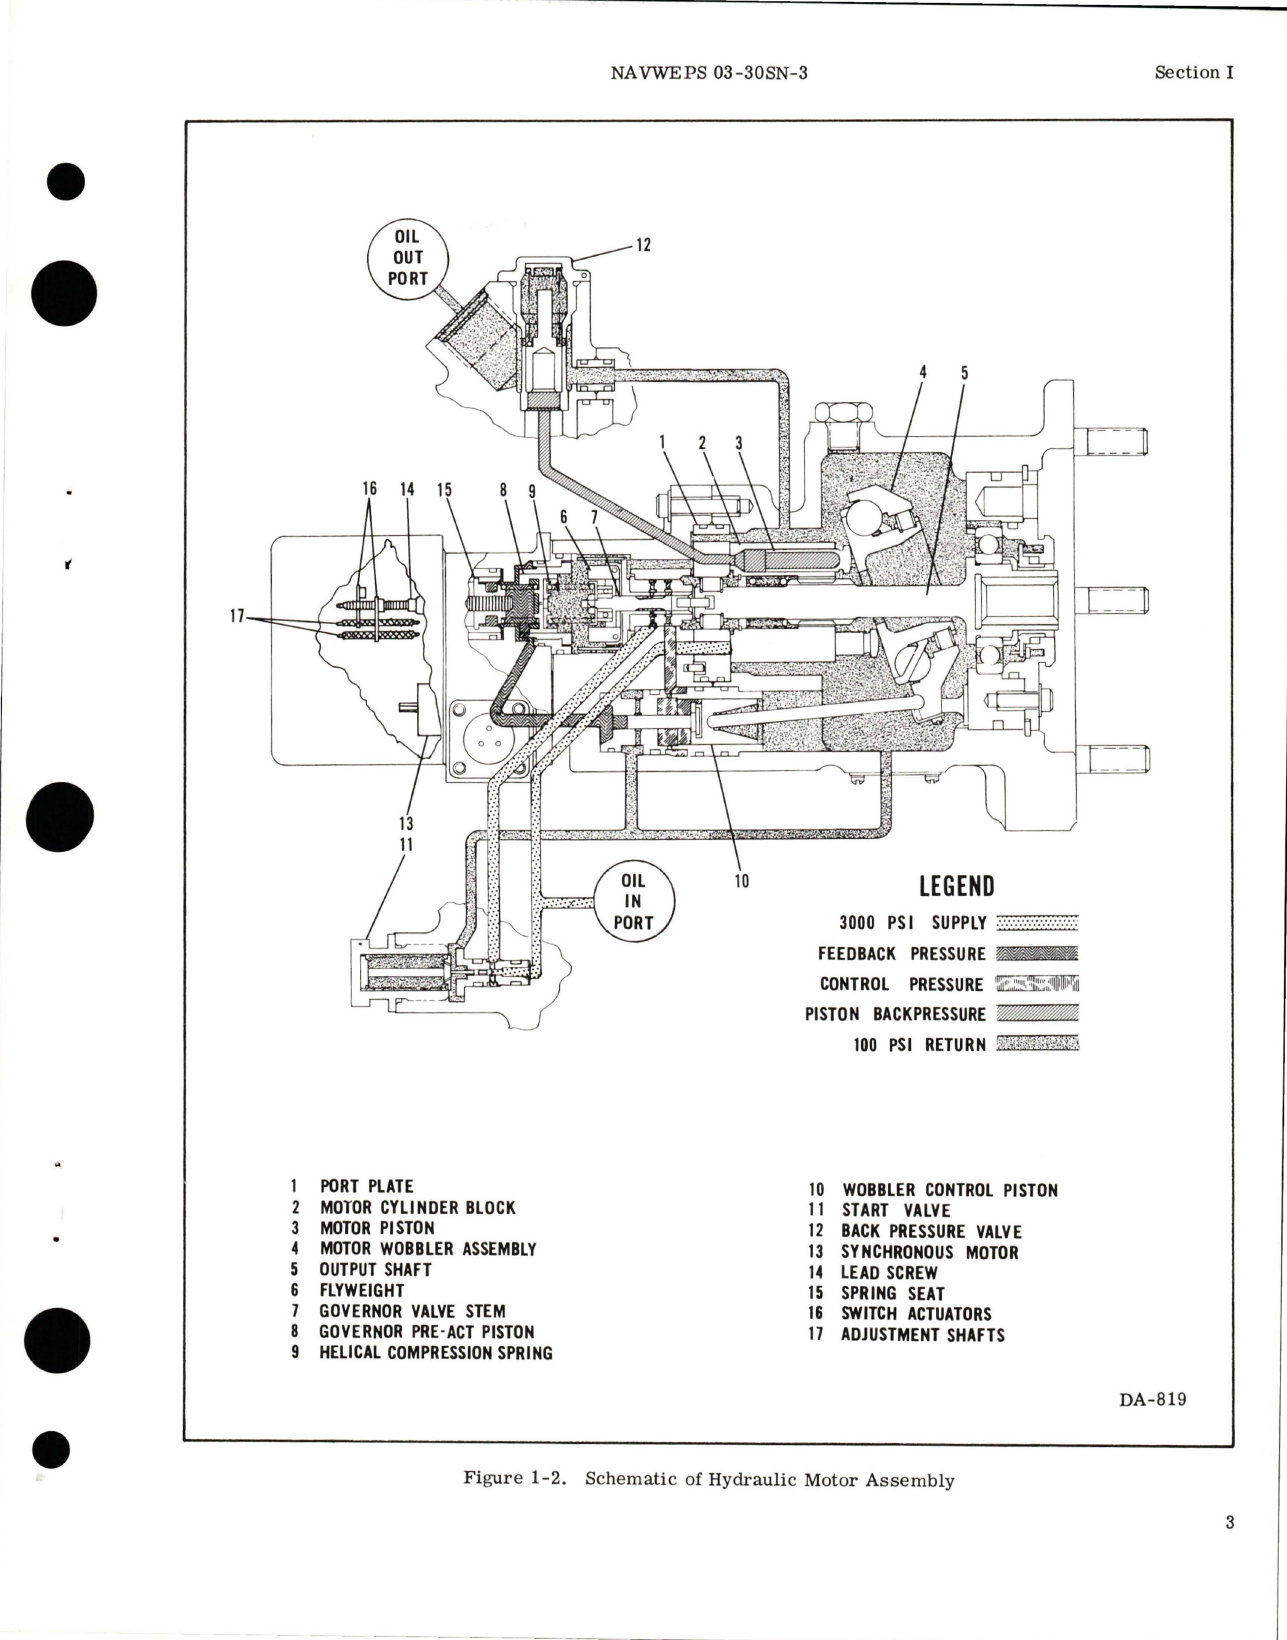 Sample page 7 from AirCorps Library document: Overhaul Instructions for Hydraulic Motor - Model MV029-CSV-1 - Part 827286B